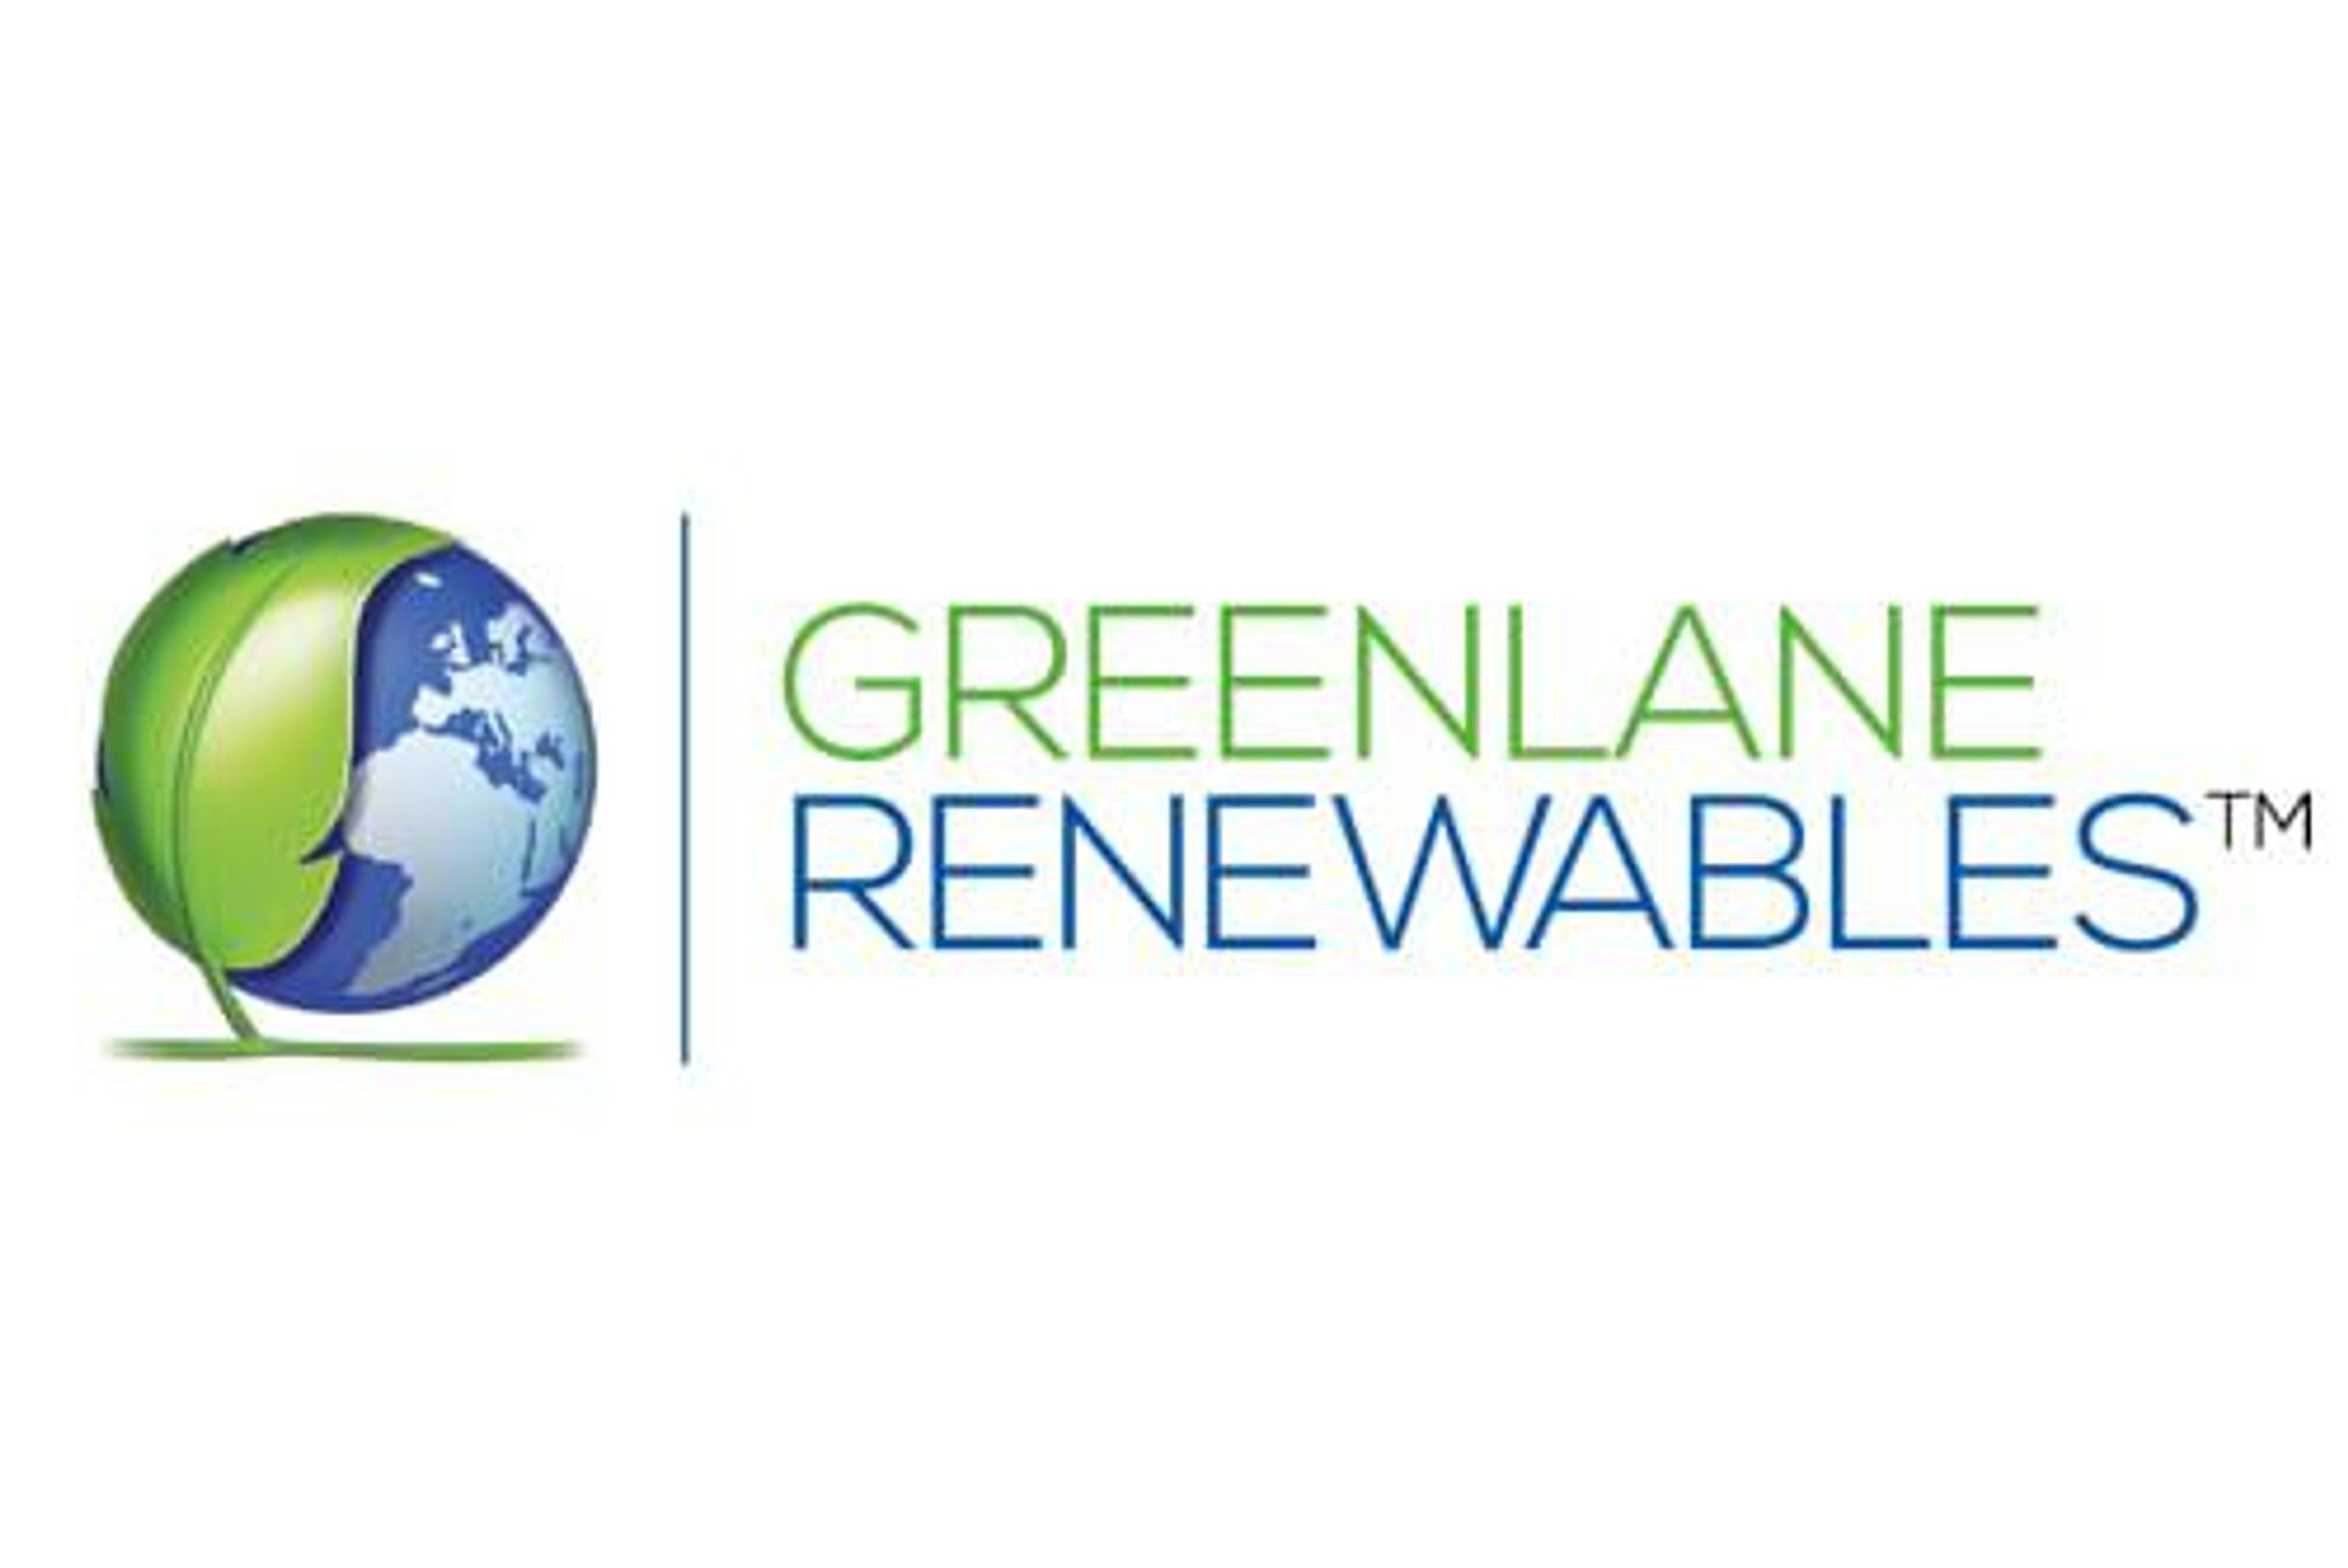 Greenlane Renewables Announces First Quarter 2022 Financial Results